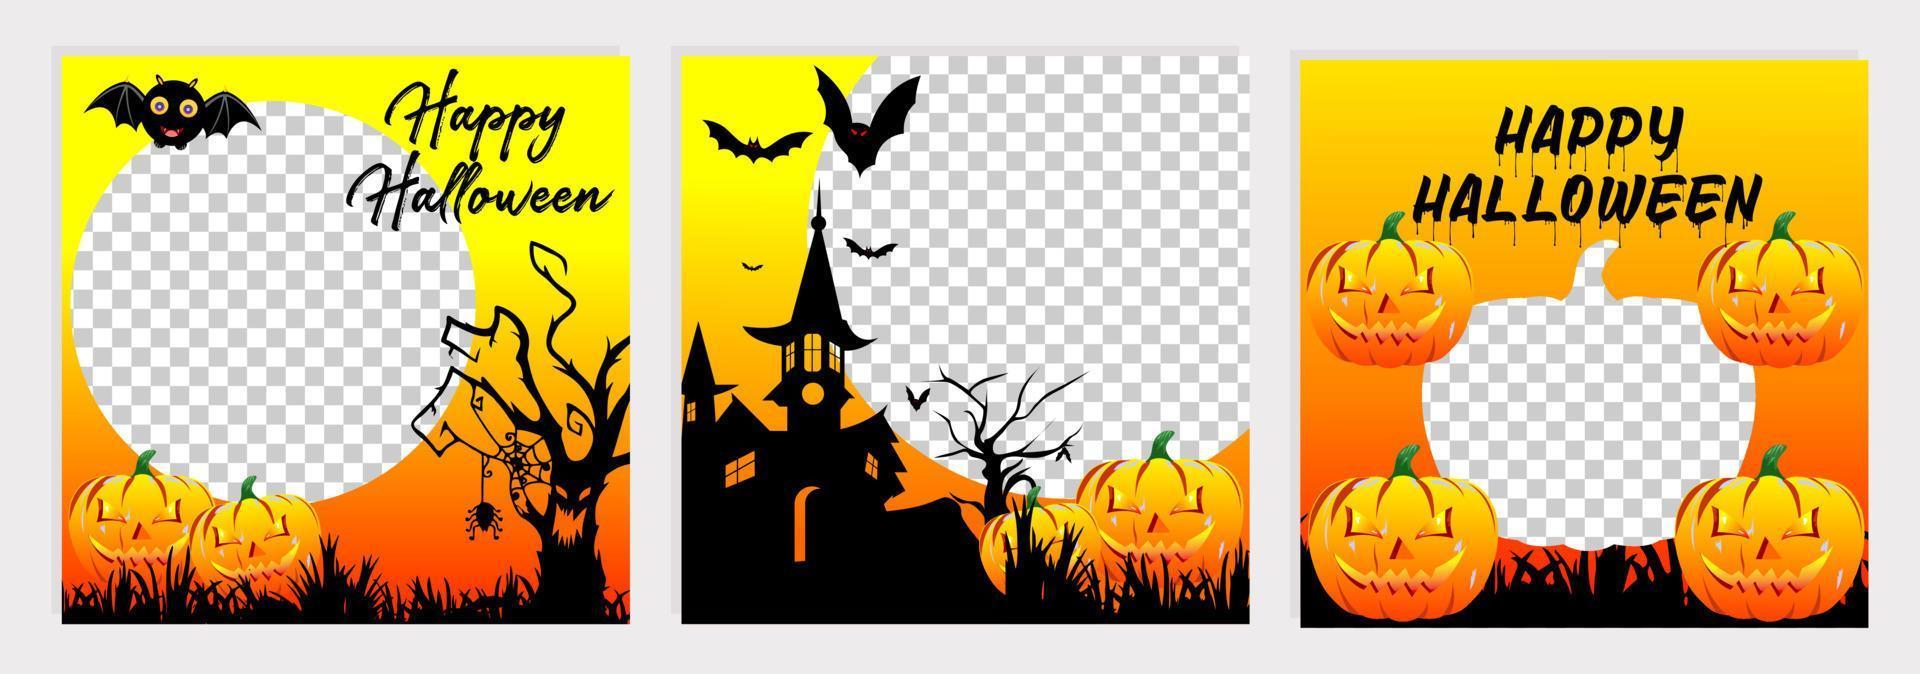 Set editable happy halloween square banner template. Suitable for social and web media posting, internet advertising. Vector illustration with photo college